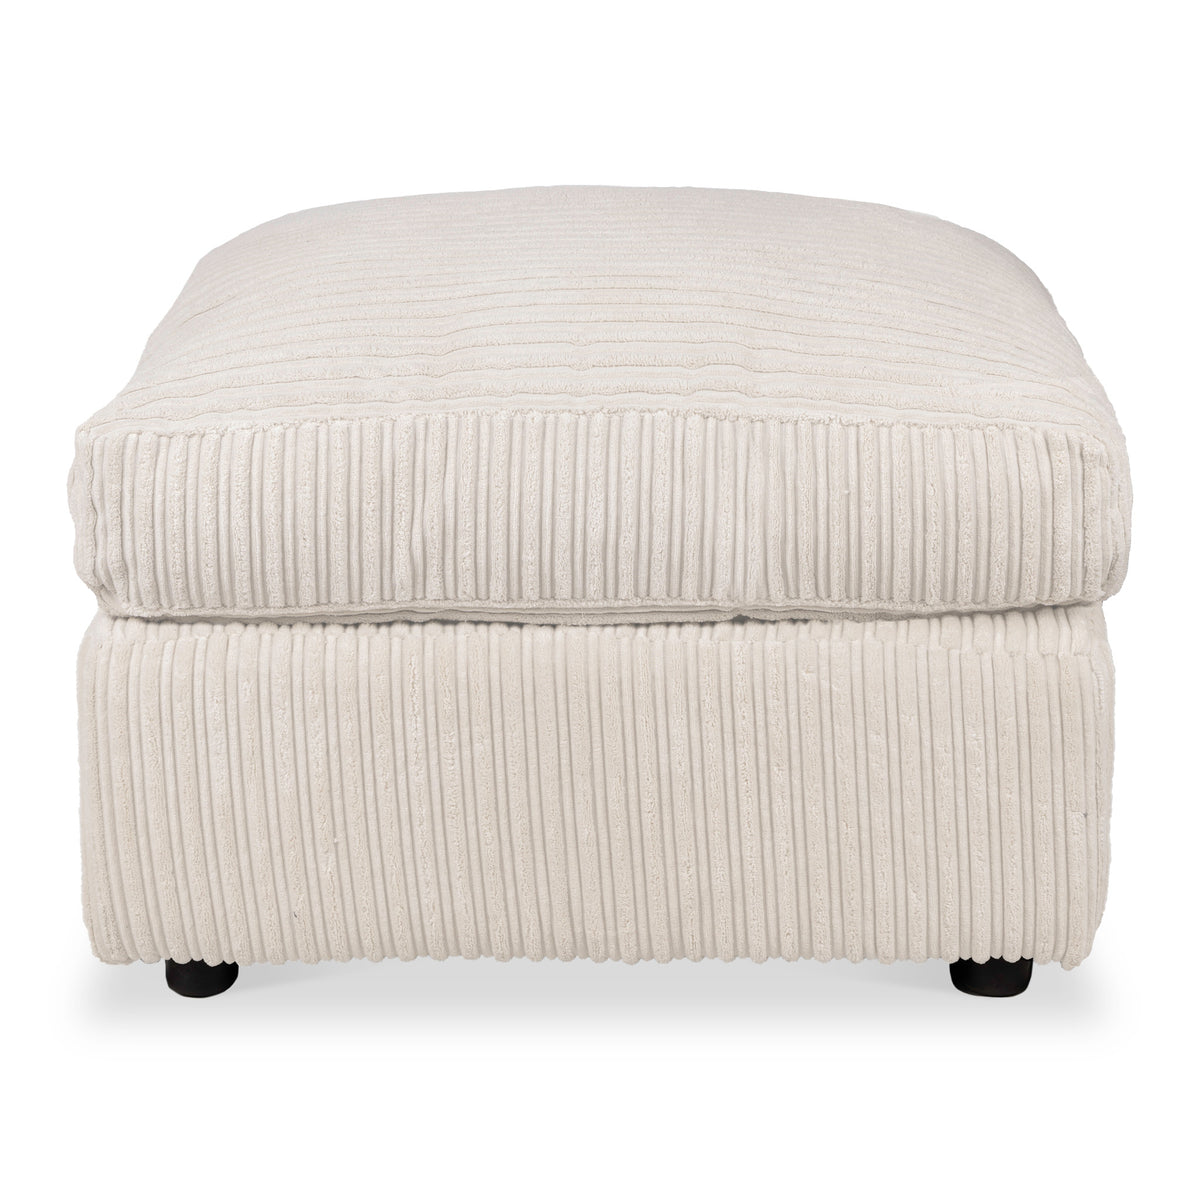 Bletchley Cream Jumbo Cord Footrest from Roseland Furniture